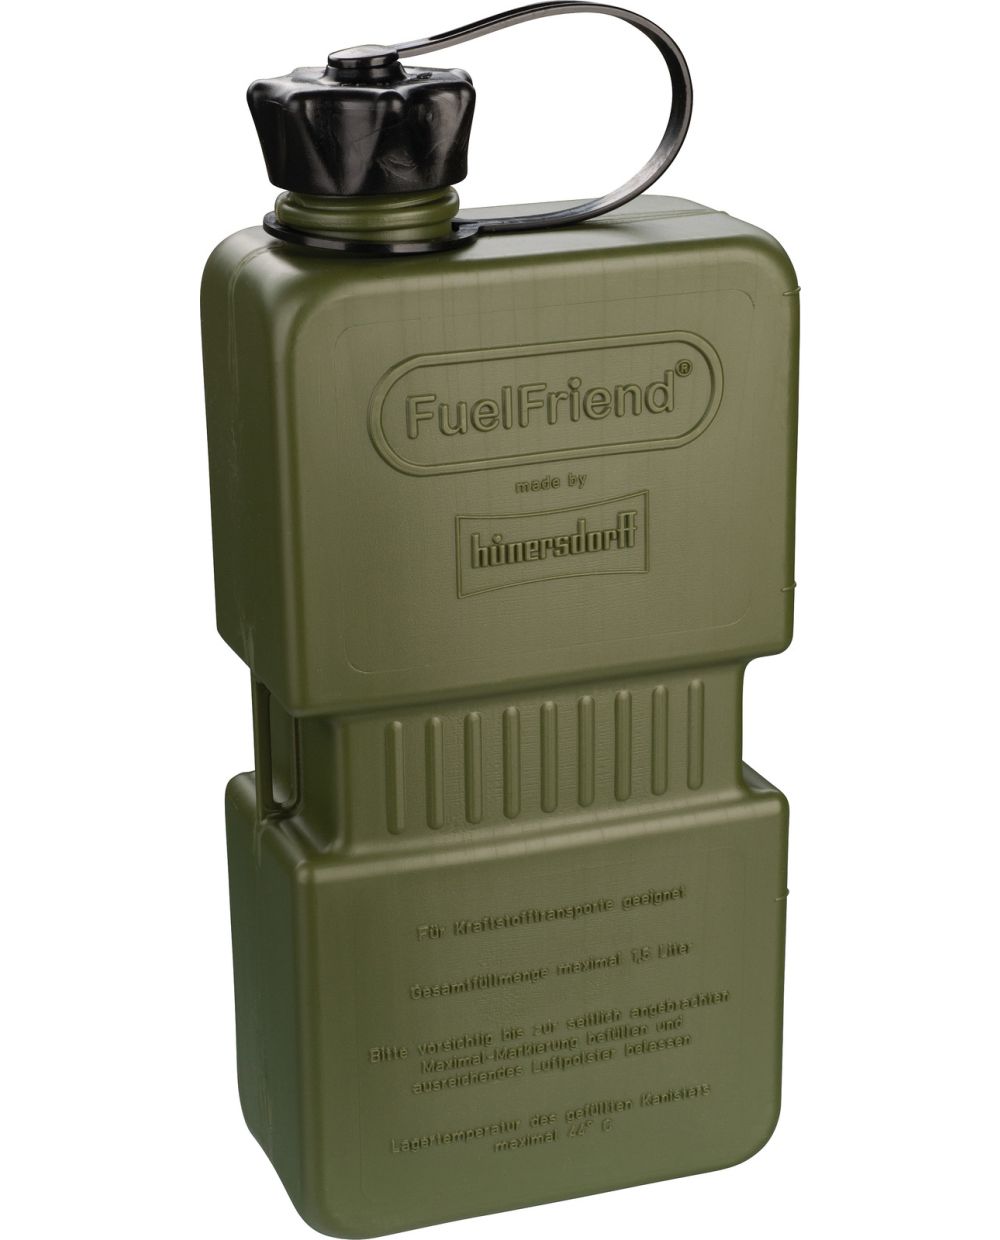 1.5L Jerry Can Hünersdorff 'Fuelfriend', army green, suitable for  petrol/oil, fastening straps for tension belts, Dim. incl. cap: 280x121x67mm